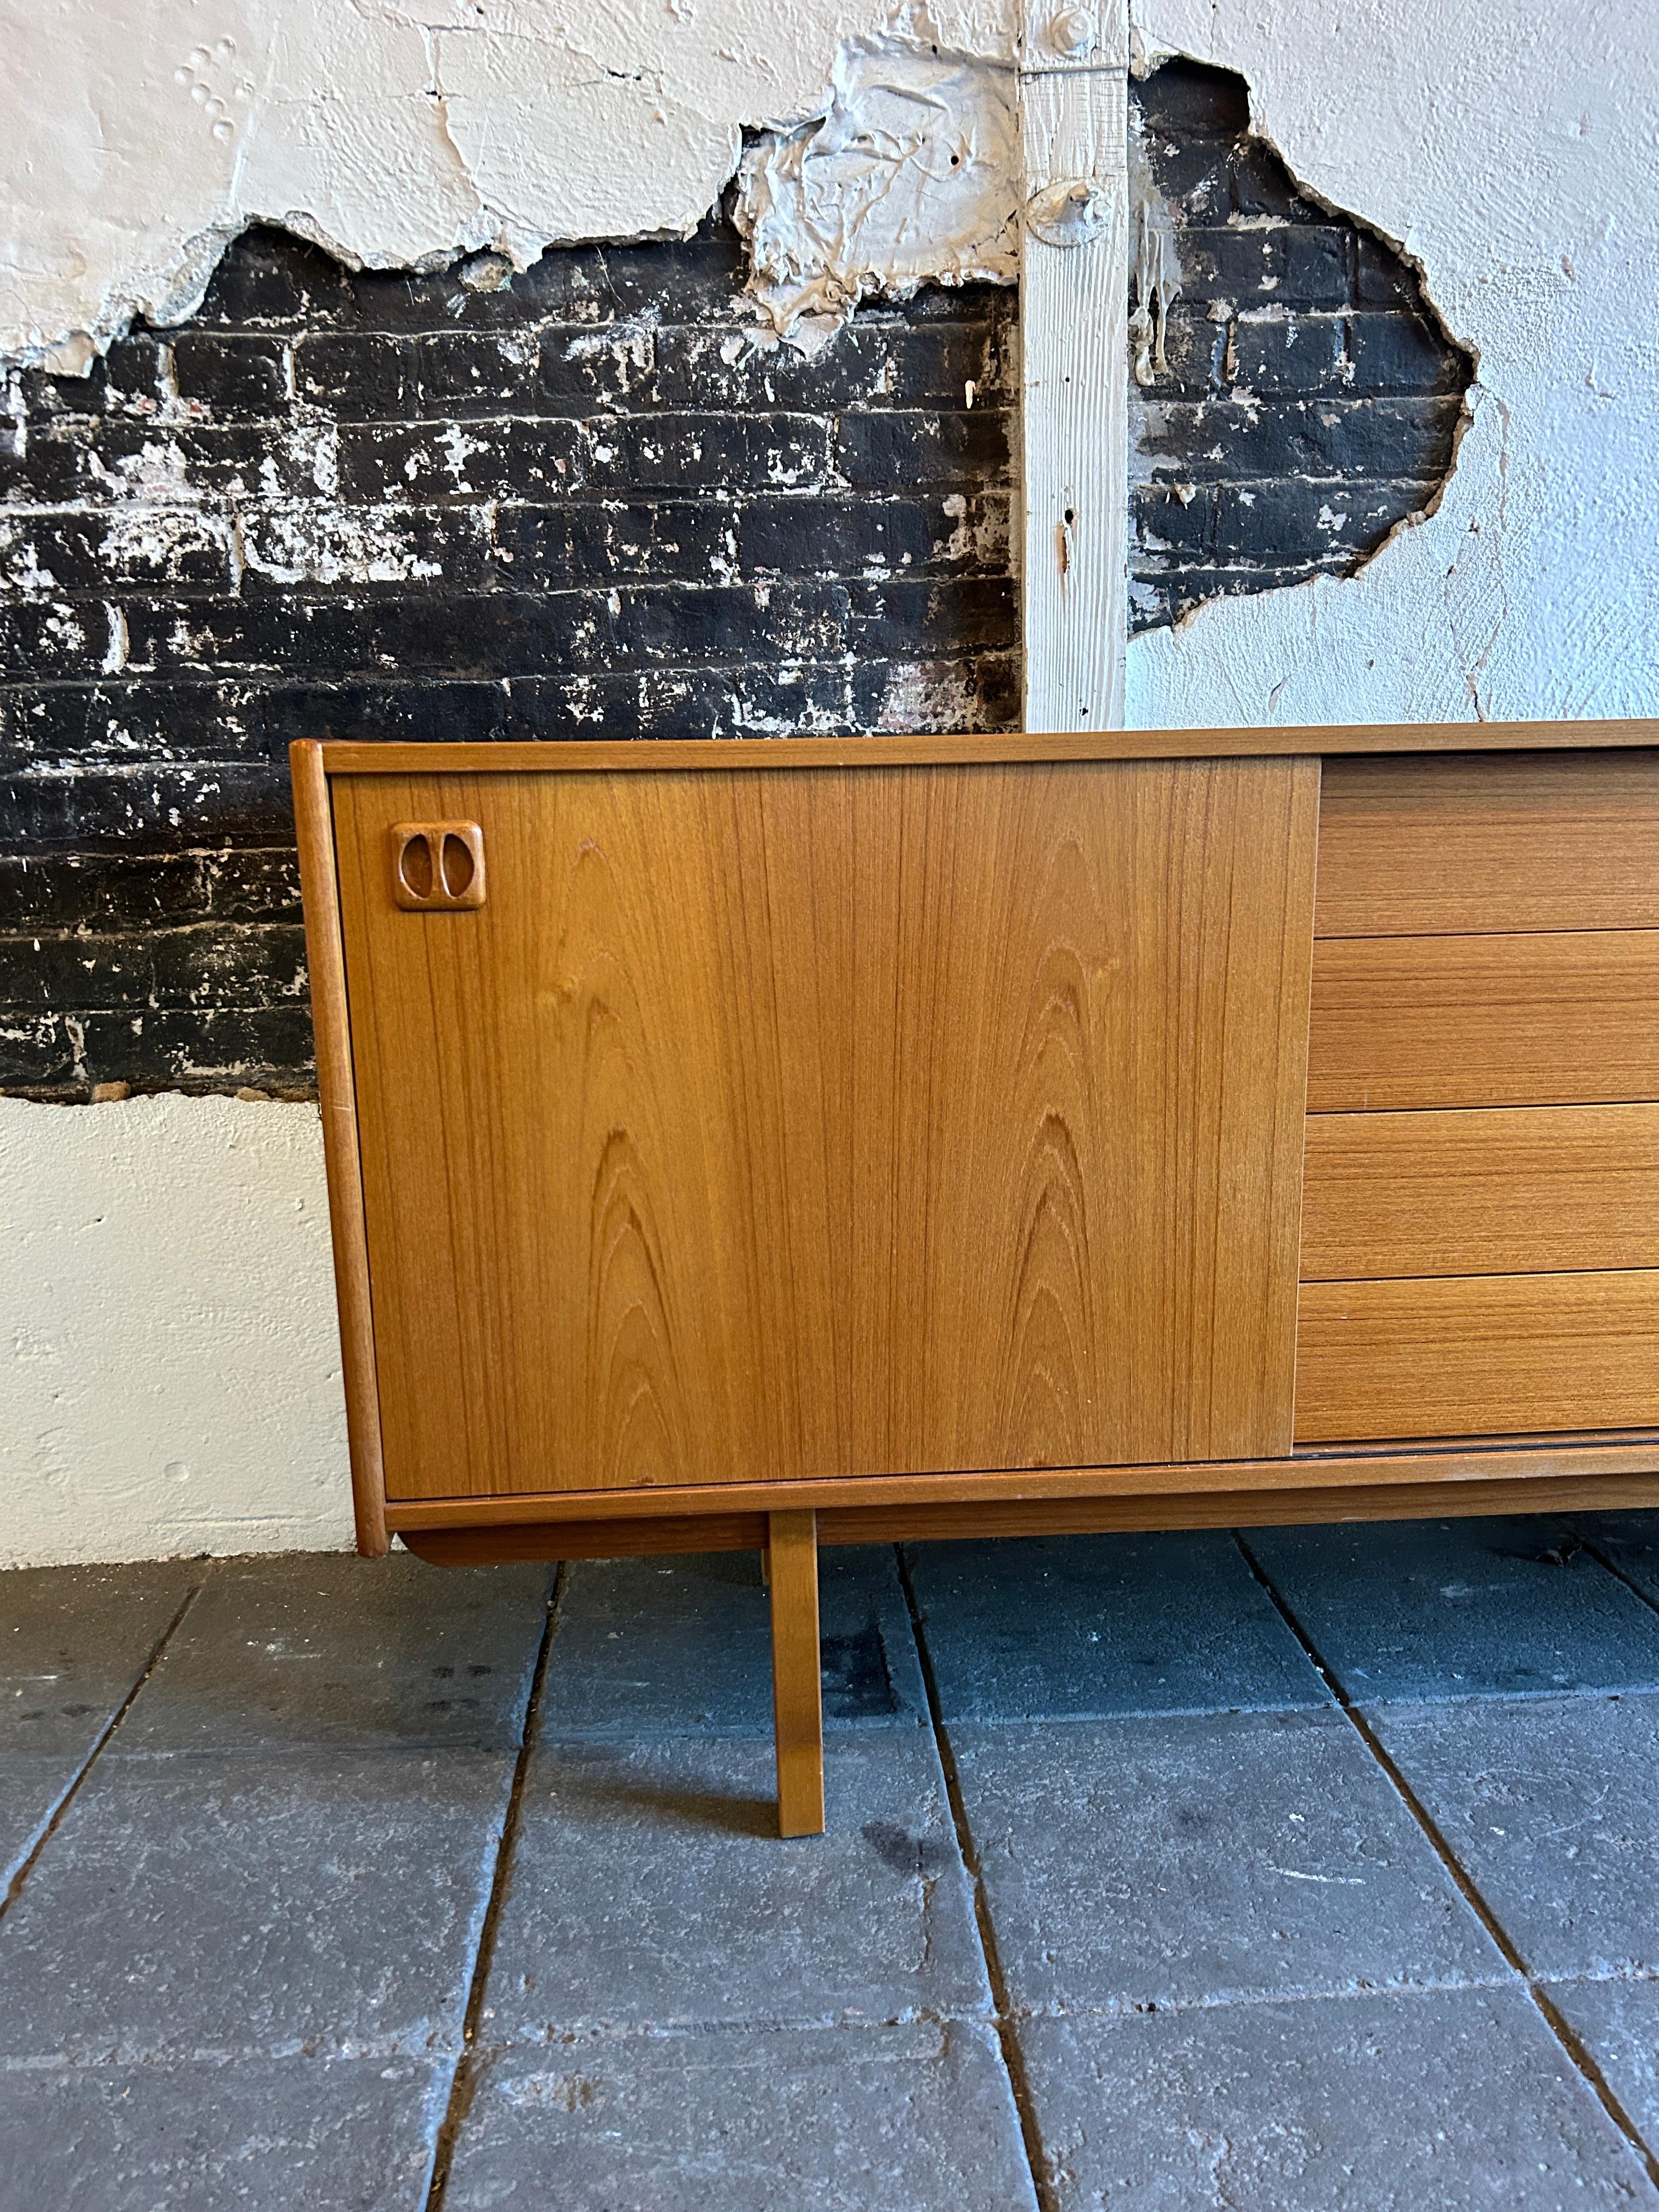 Mid Century Modern Swedish Teak Credenza with 4 drawers and 2 sliding doors by Erik Worts. Has a with a pair of sliding doors opening to adjustable shelves centering four drawers. Sits on 4 square legs. Great vintage condition. Very Clean and Ready